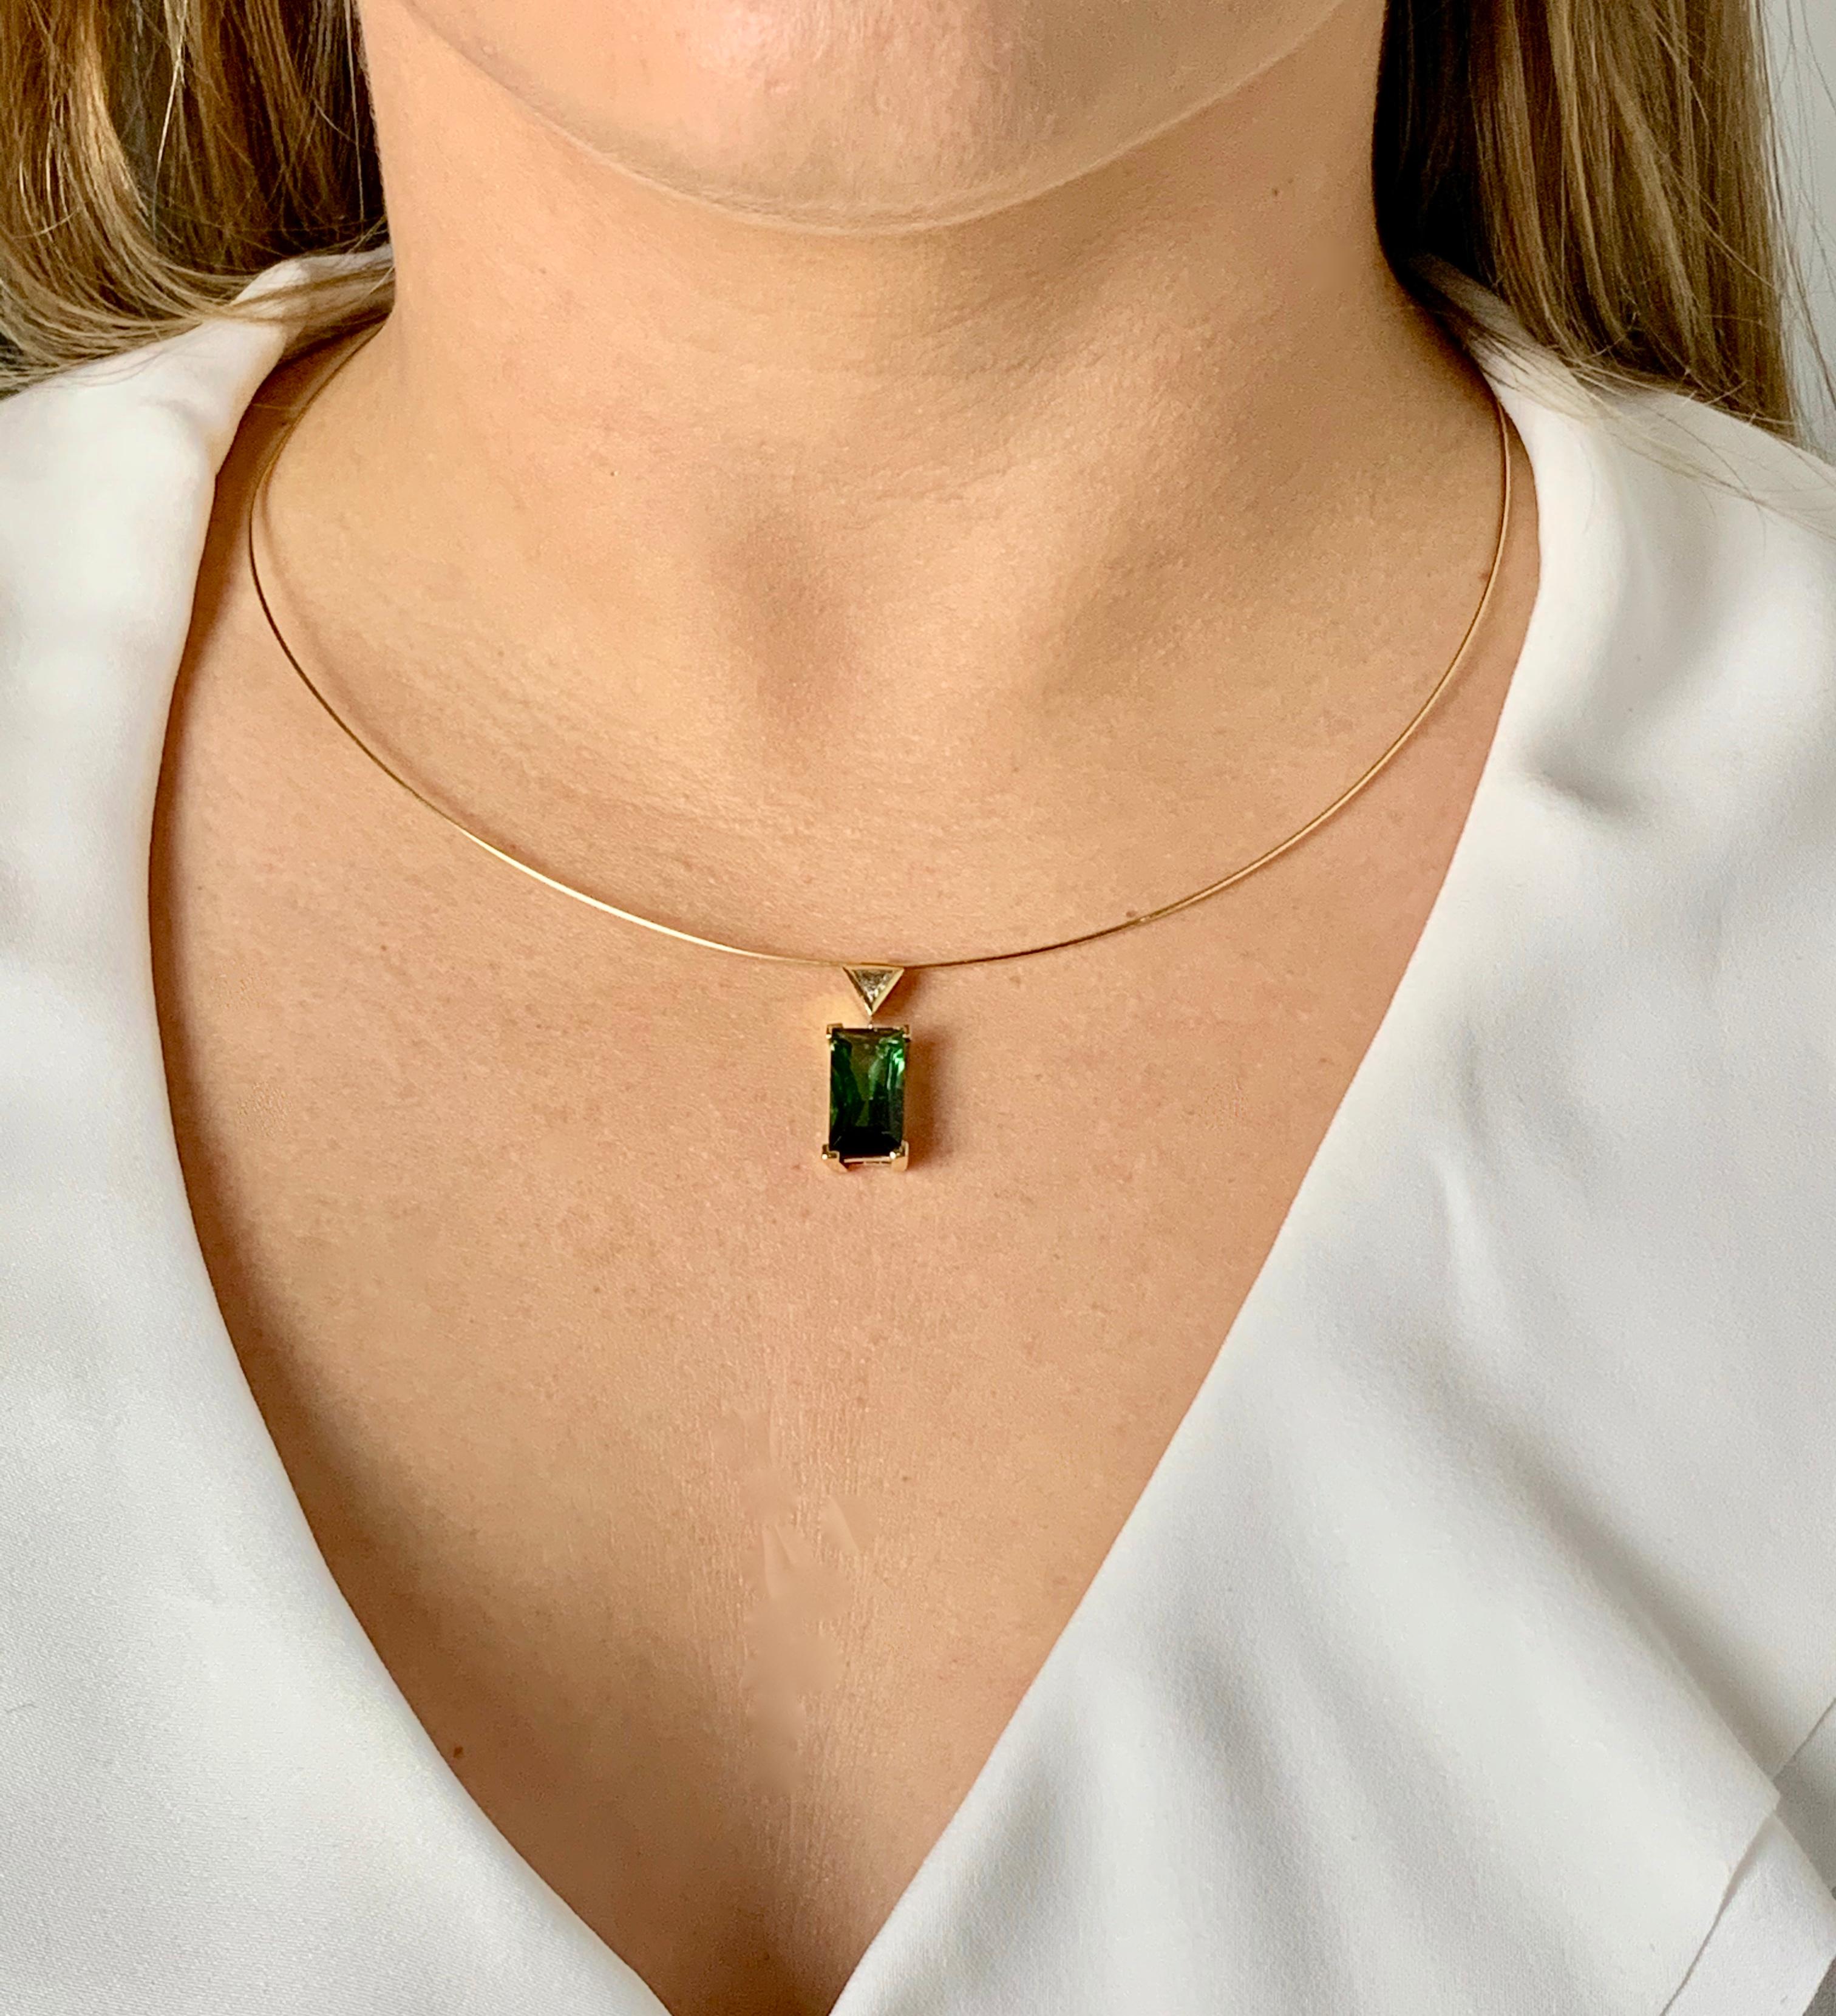 Bespoke 6.10ct Octagon Cut Green Tourmaline Diamond Pendant on 18ct Neck Wire In New Condition For Sale In Chislehurst, Kent